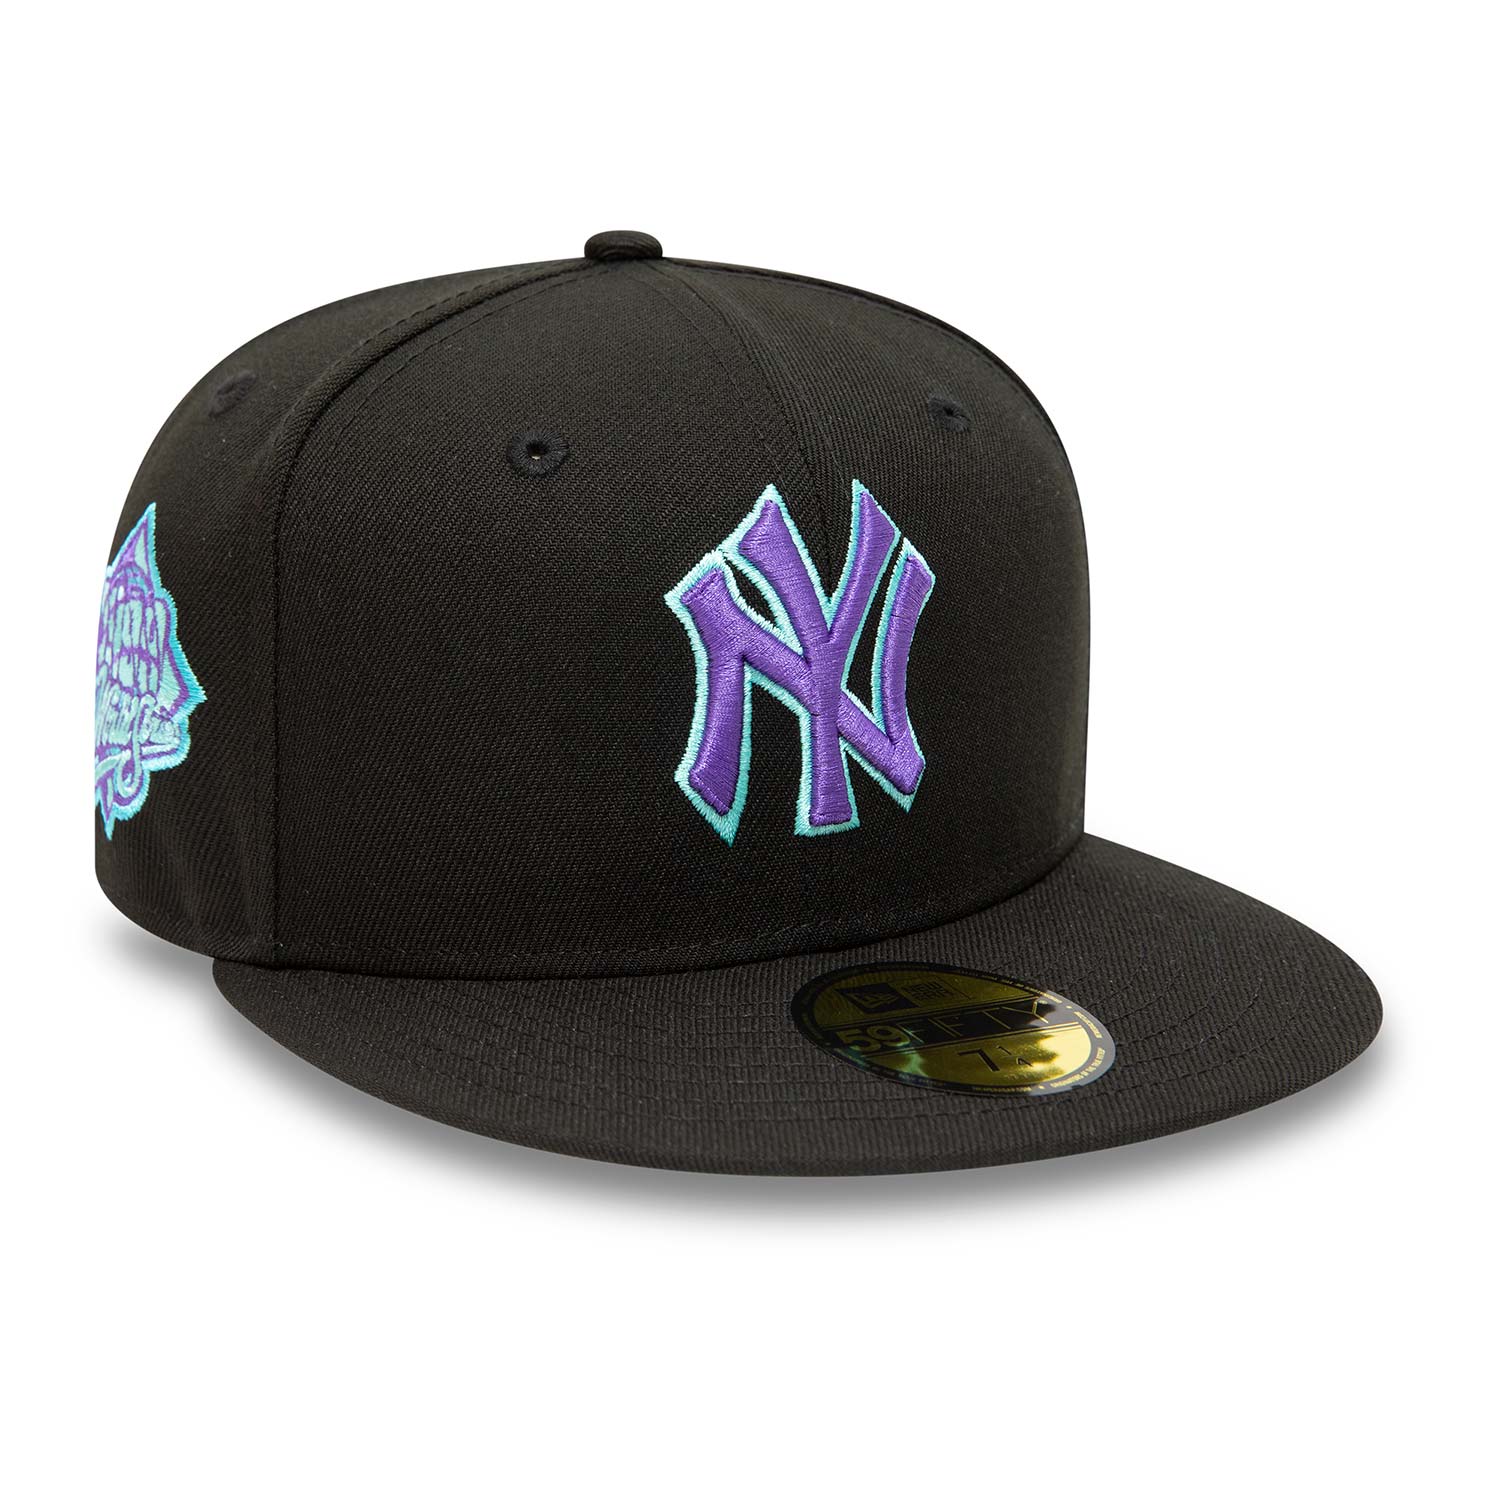 https://www.neweracap.co.uk/globalassets/products/b8573_282/70697170/new-york-yankees-black-and-blue-tint-59fifty-fitted-cap-70697170-back.jpg